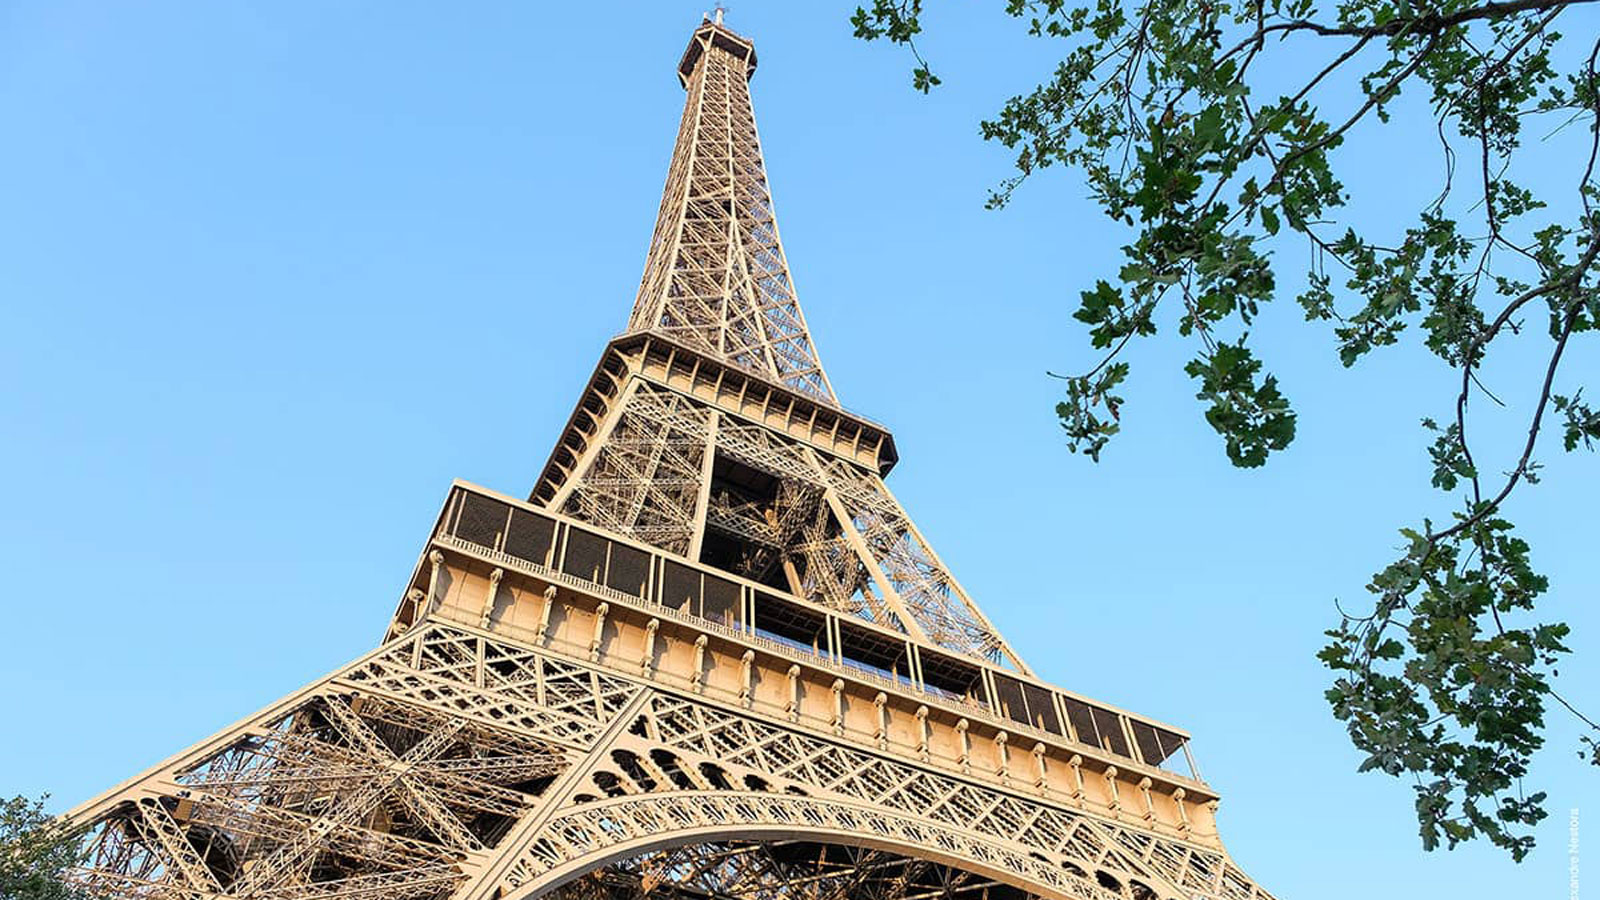 The ‘Eiffel Tower’ That Time Forgot